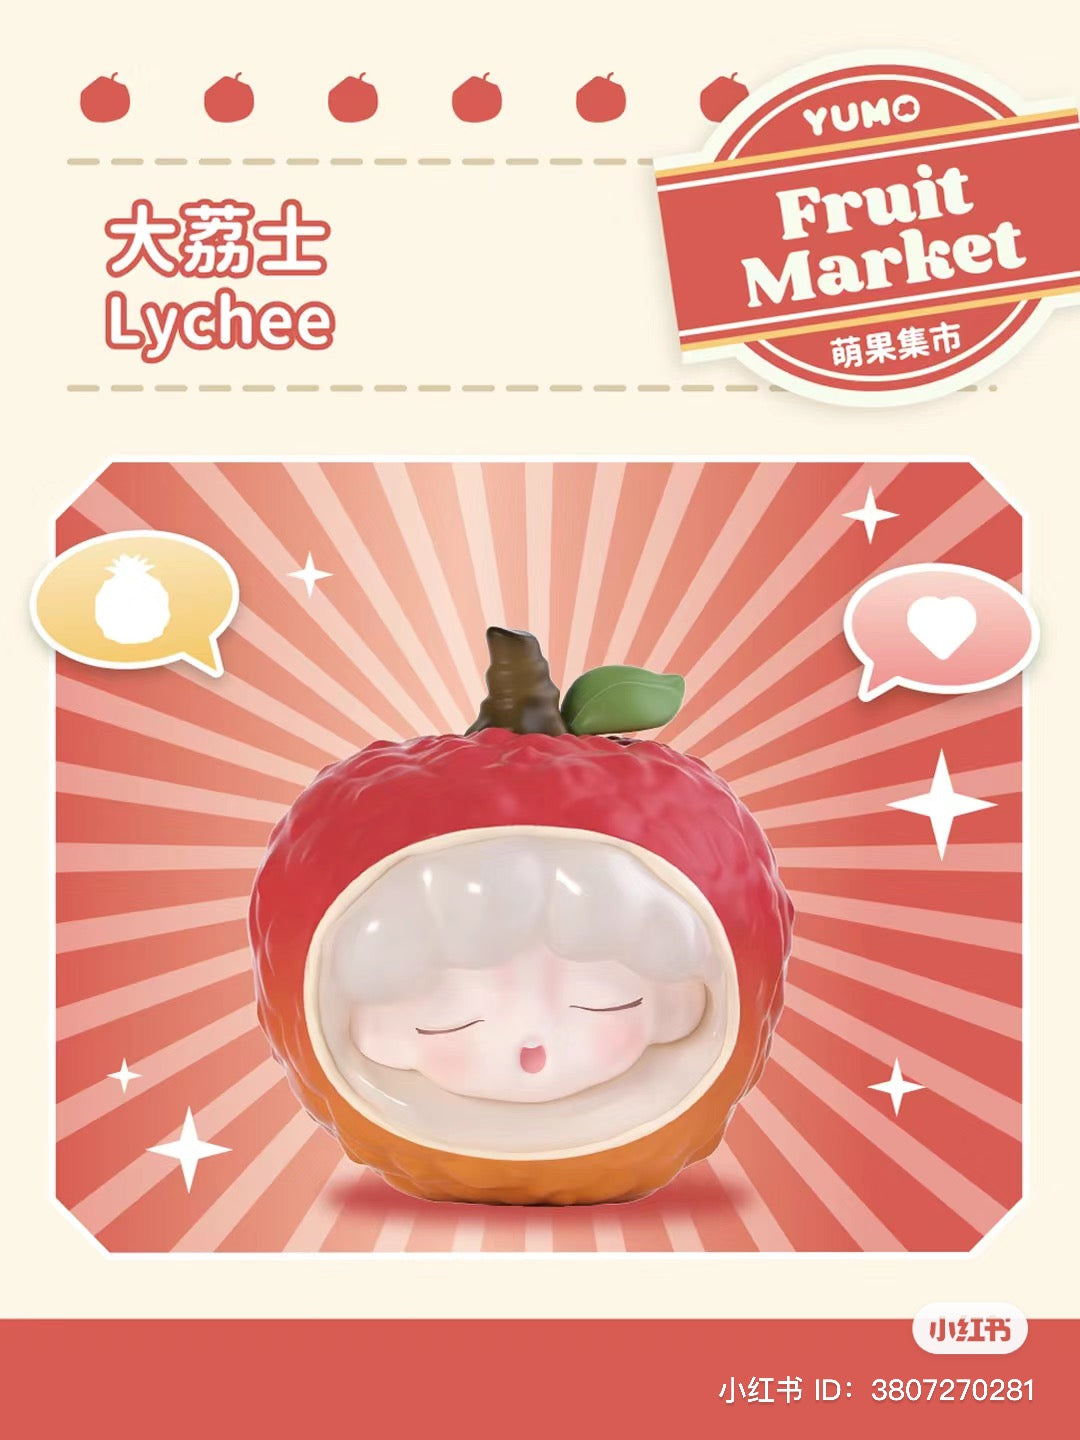 A blind box series featuring Yumo Fruit Market figurines. Preorder for May 2024. 12 regular designs and 1 secret. Each box contains 2 different fruit-themed toys.